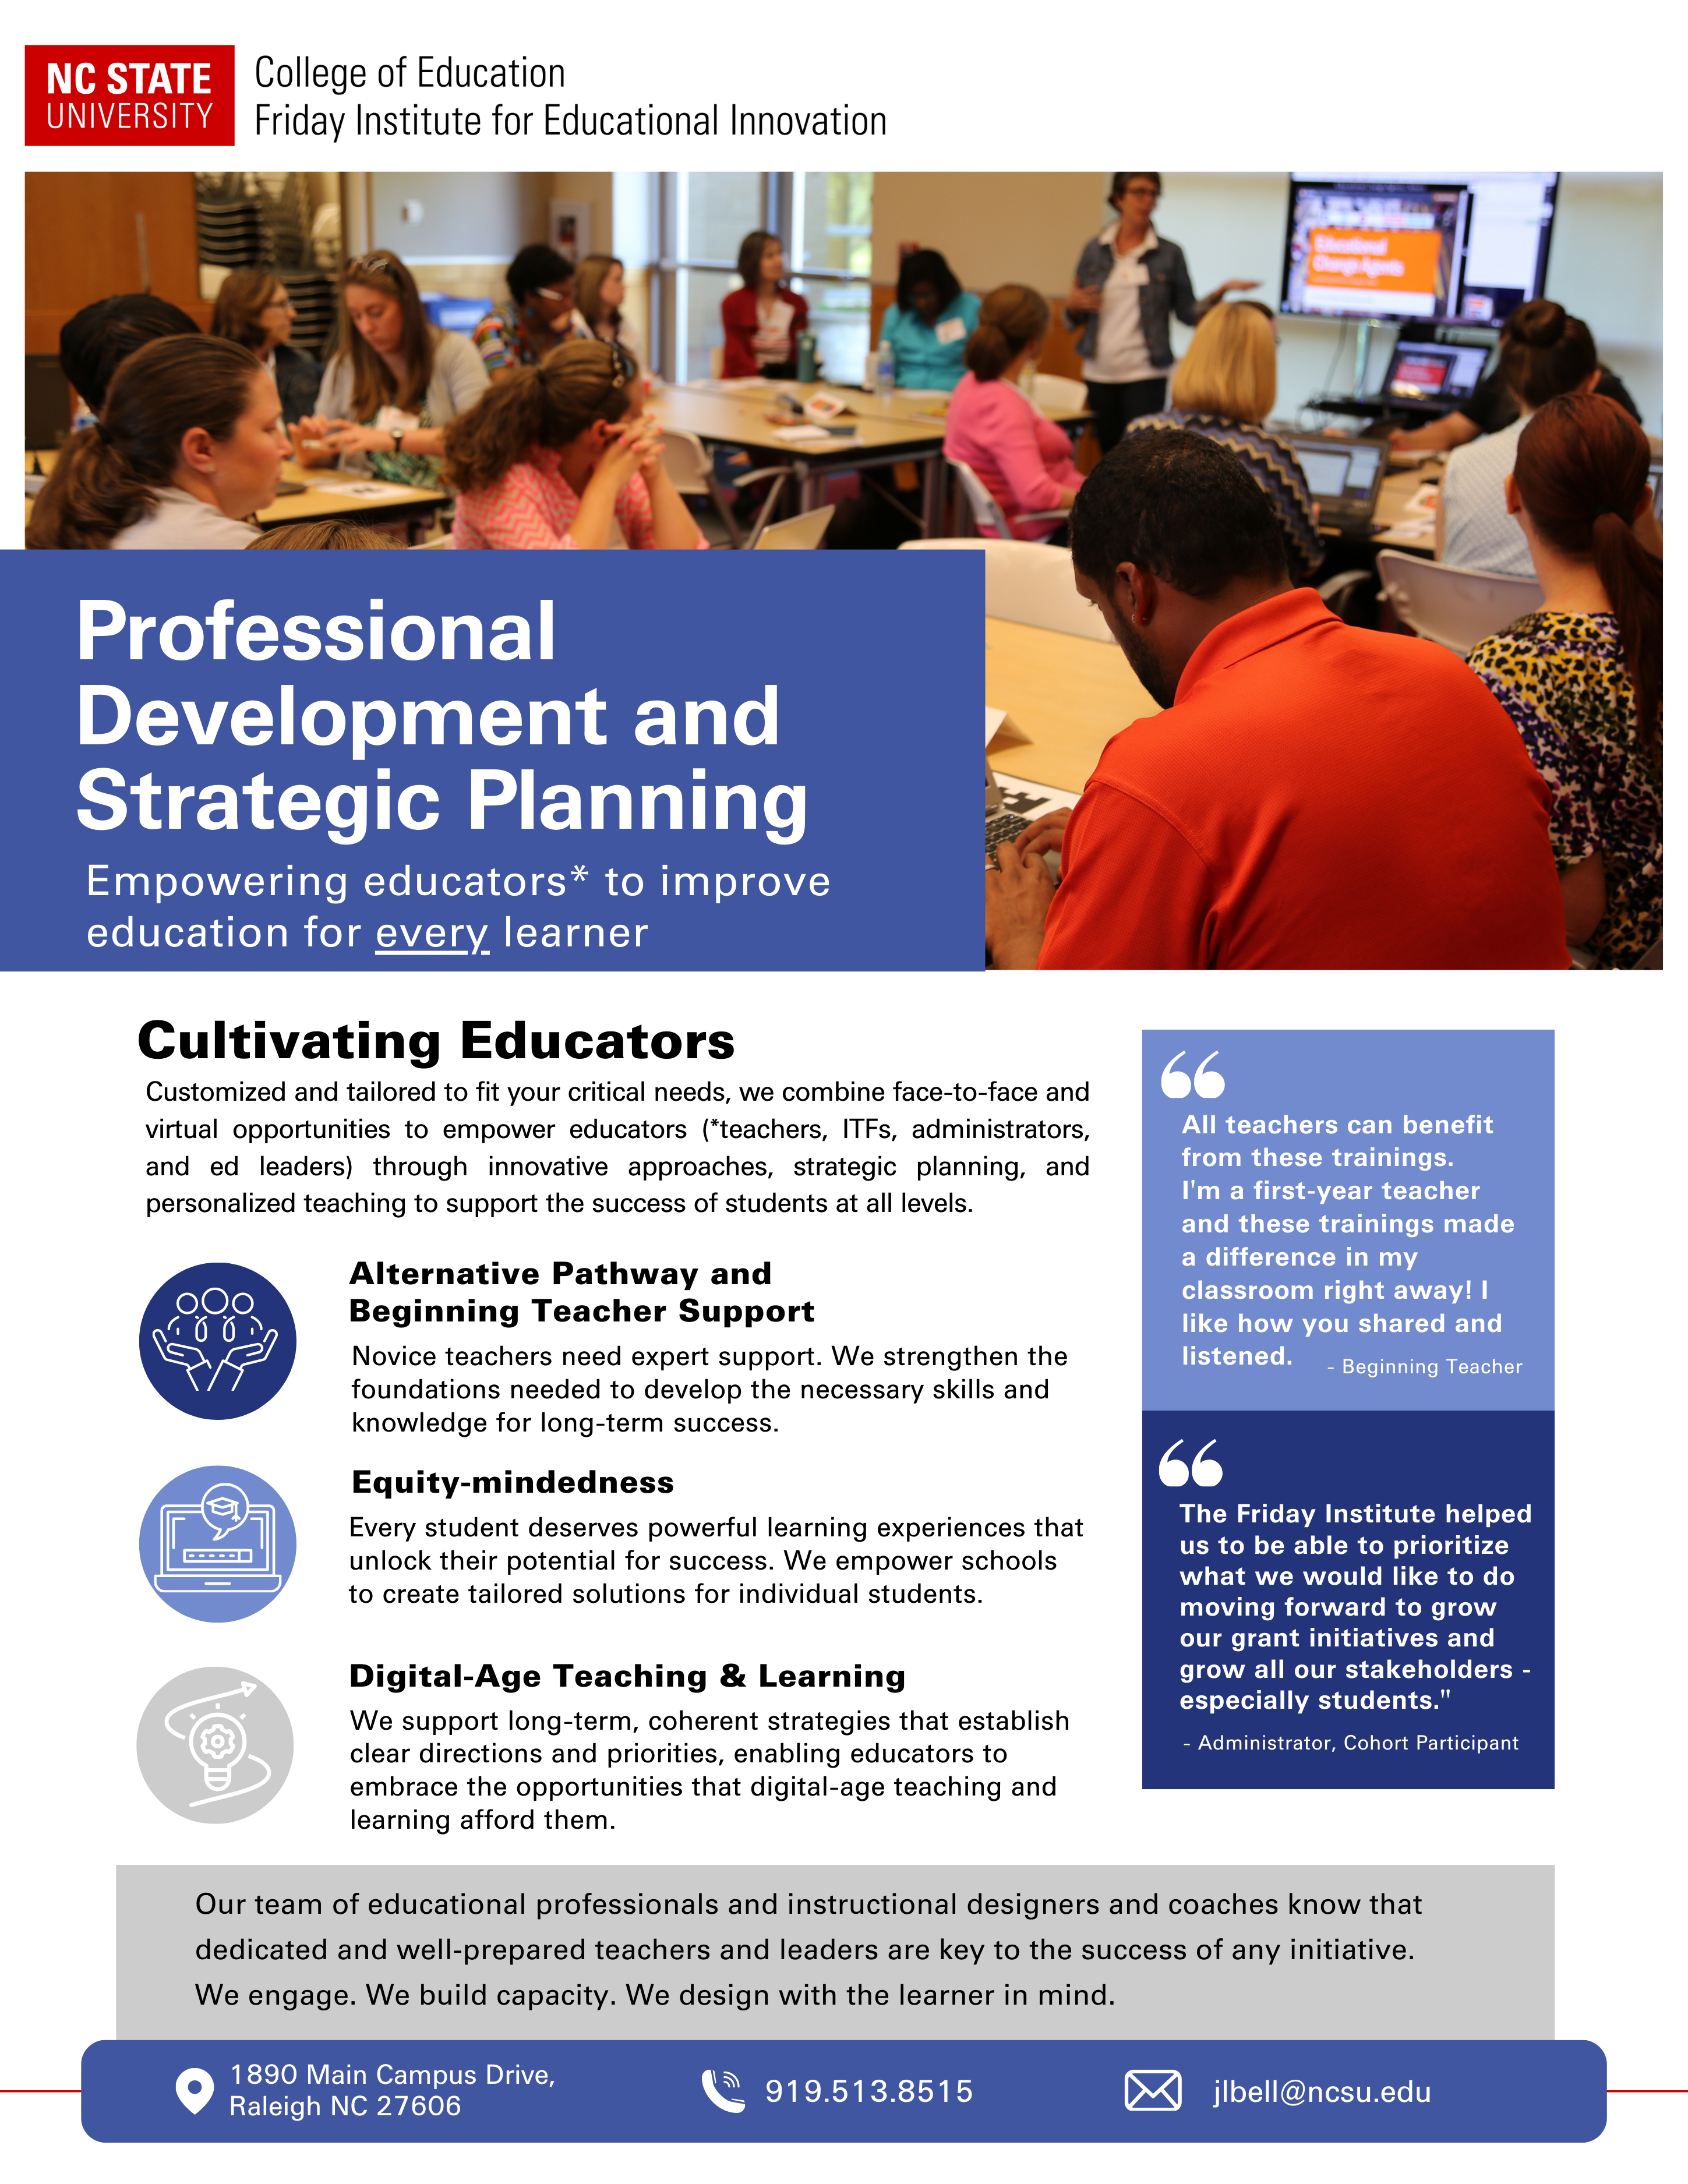 Handout for Professional Development and Strategic Planning featuring key features: alternative pathway and beginning teacher support, equity-mindedness, and digital age teaching and learning